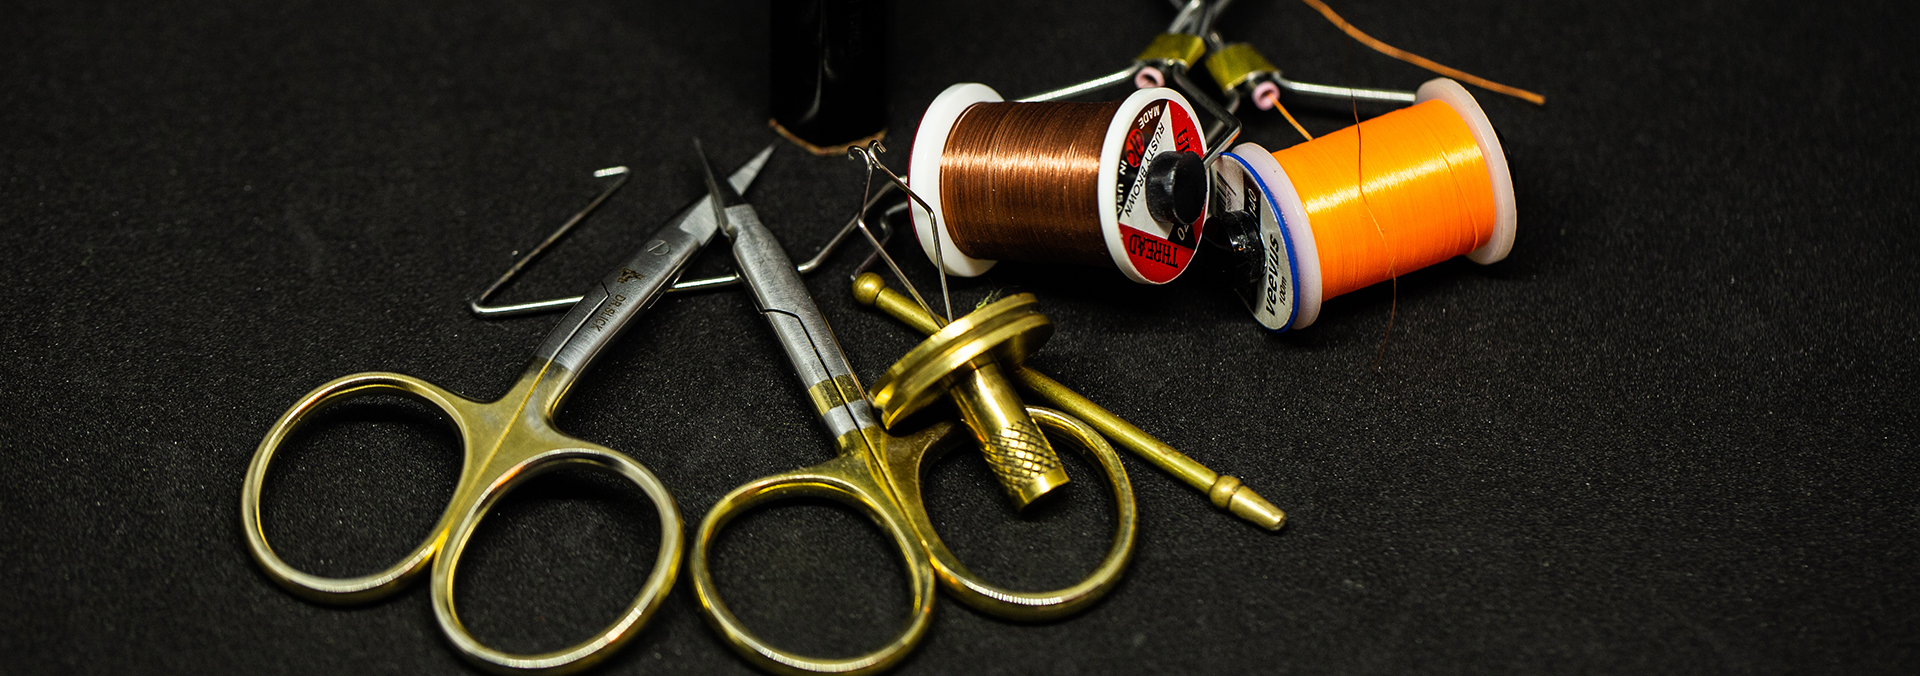 A Beginner's Guide to Fly-Tying Tools - Go Fish BC